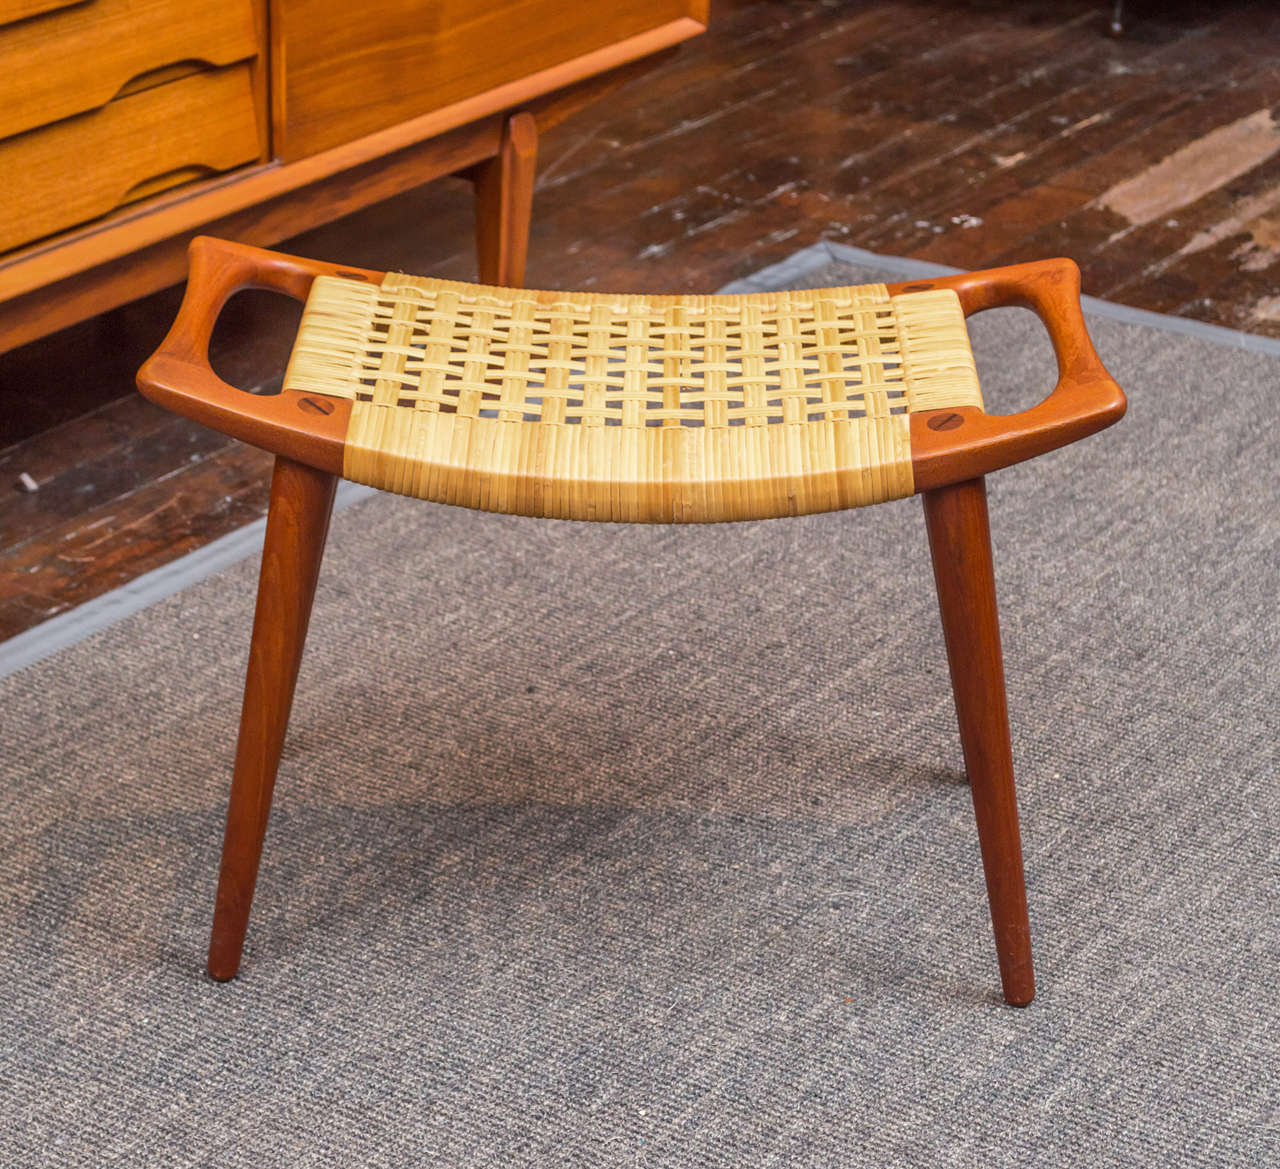 Sculptural stool or bench in excellent original condition. Made with solid teak and a woven cane seat. 
Made by Johannes Hansen, labeled.